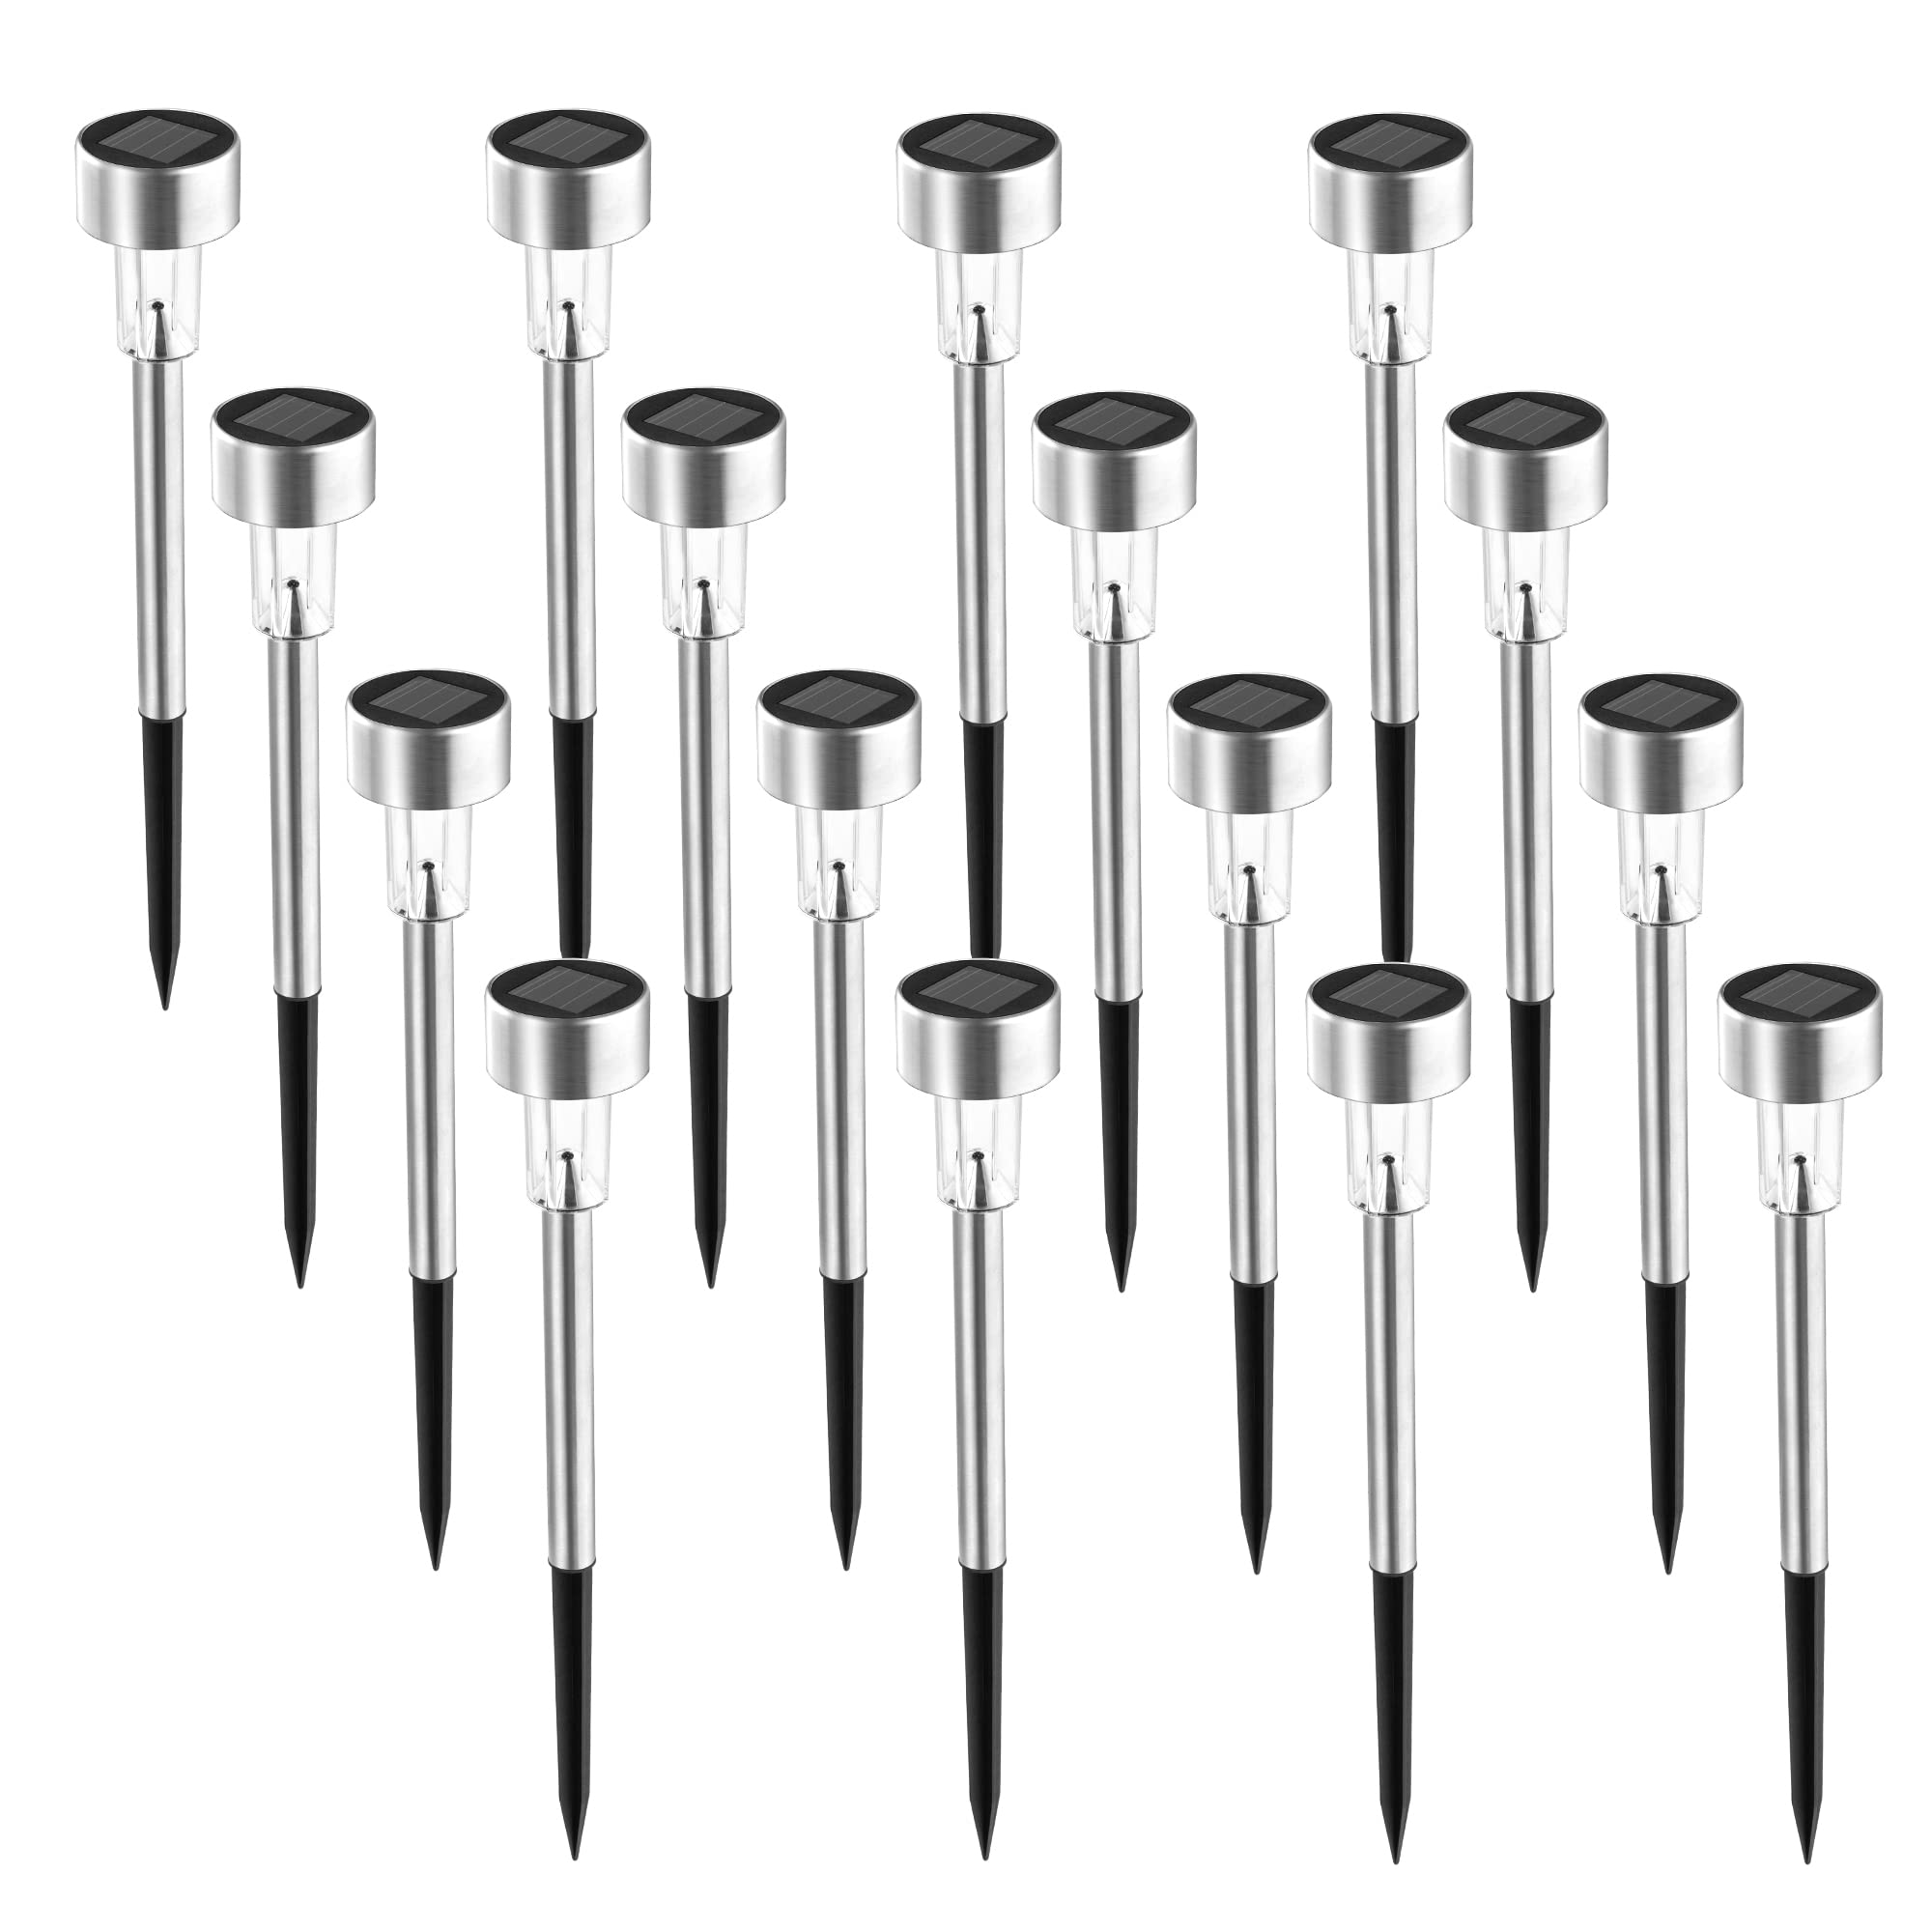 SOLPEX 16 Pack Solar Outdoor Lights Pathway, Stainless Steel Solar Lights Outdoor Waterproof,LED Landscape Lighting Solar Walkway Lights for Landscape/ Patio/Lawn/Yard/Driveway-Warm White